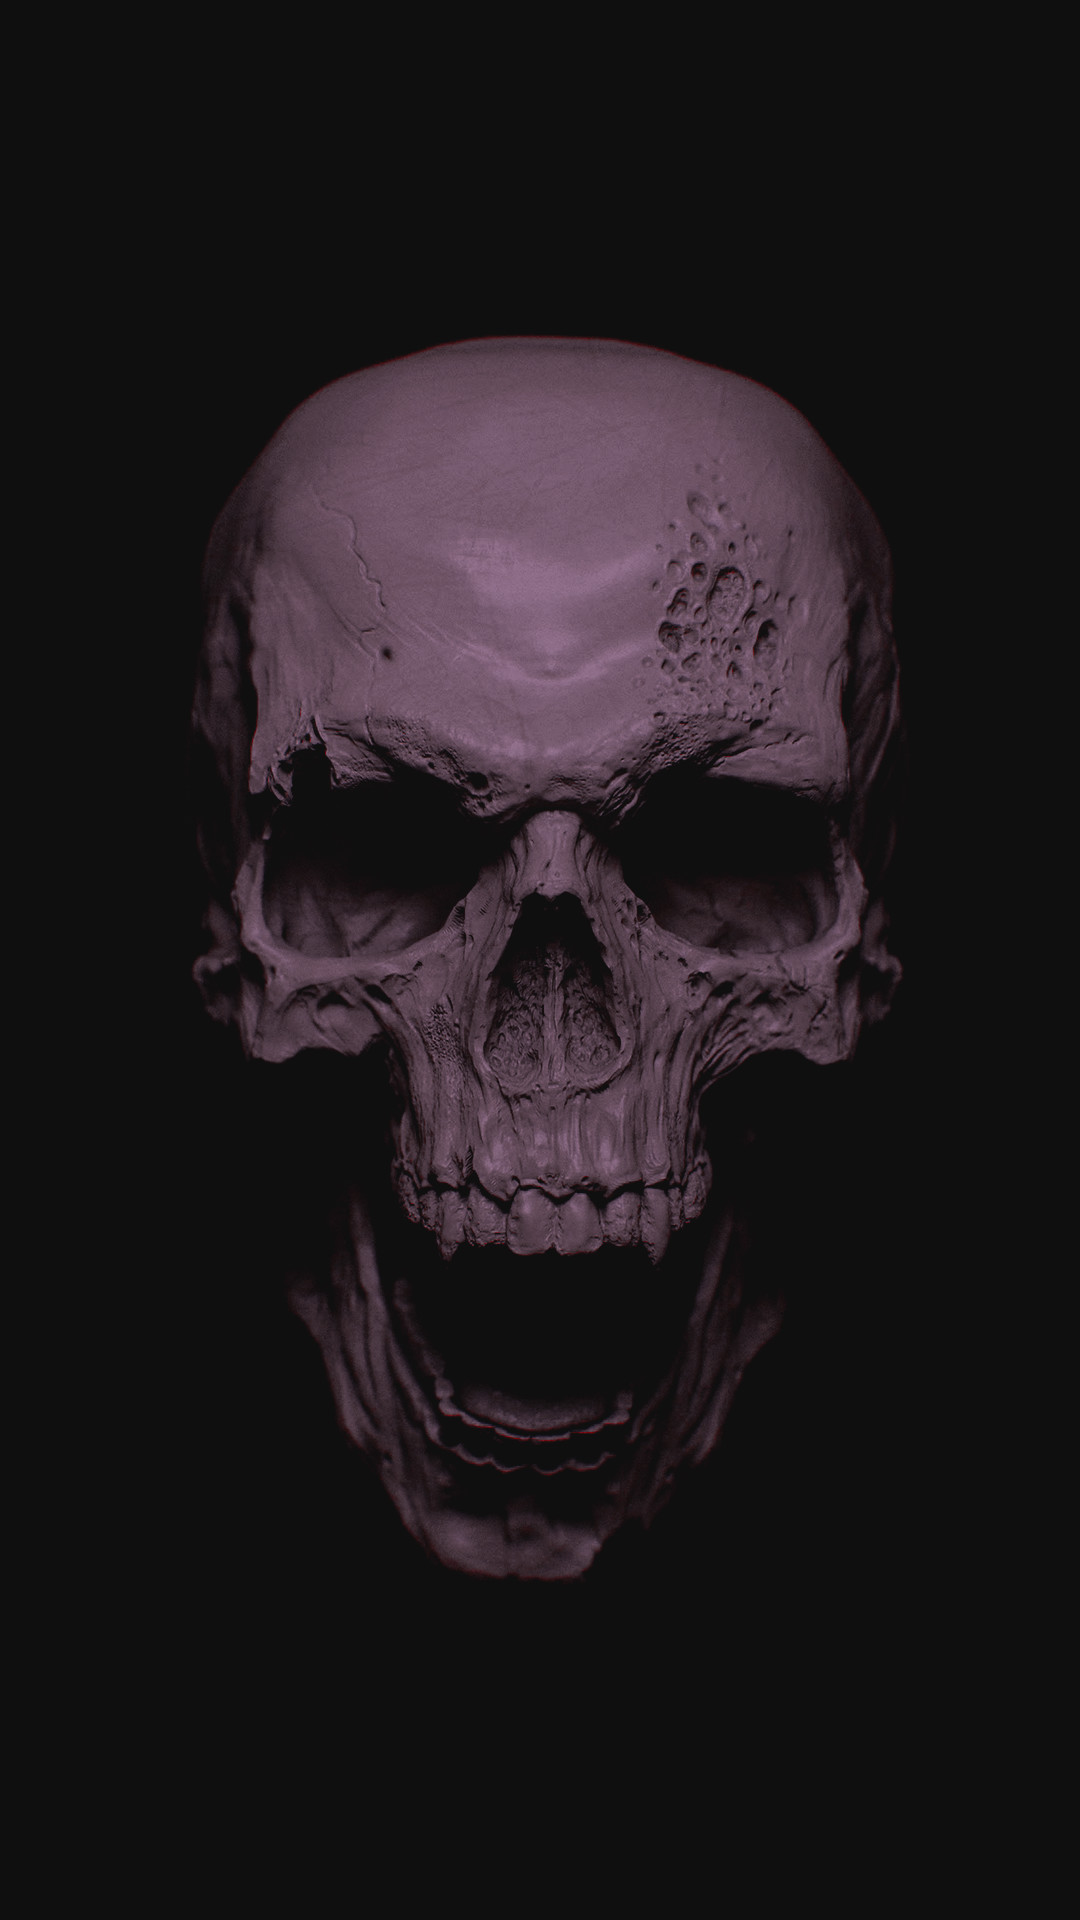 1080x1920 Free Hd Grey Skull Iphone Wallpaper For Download 0127